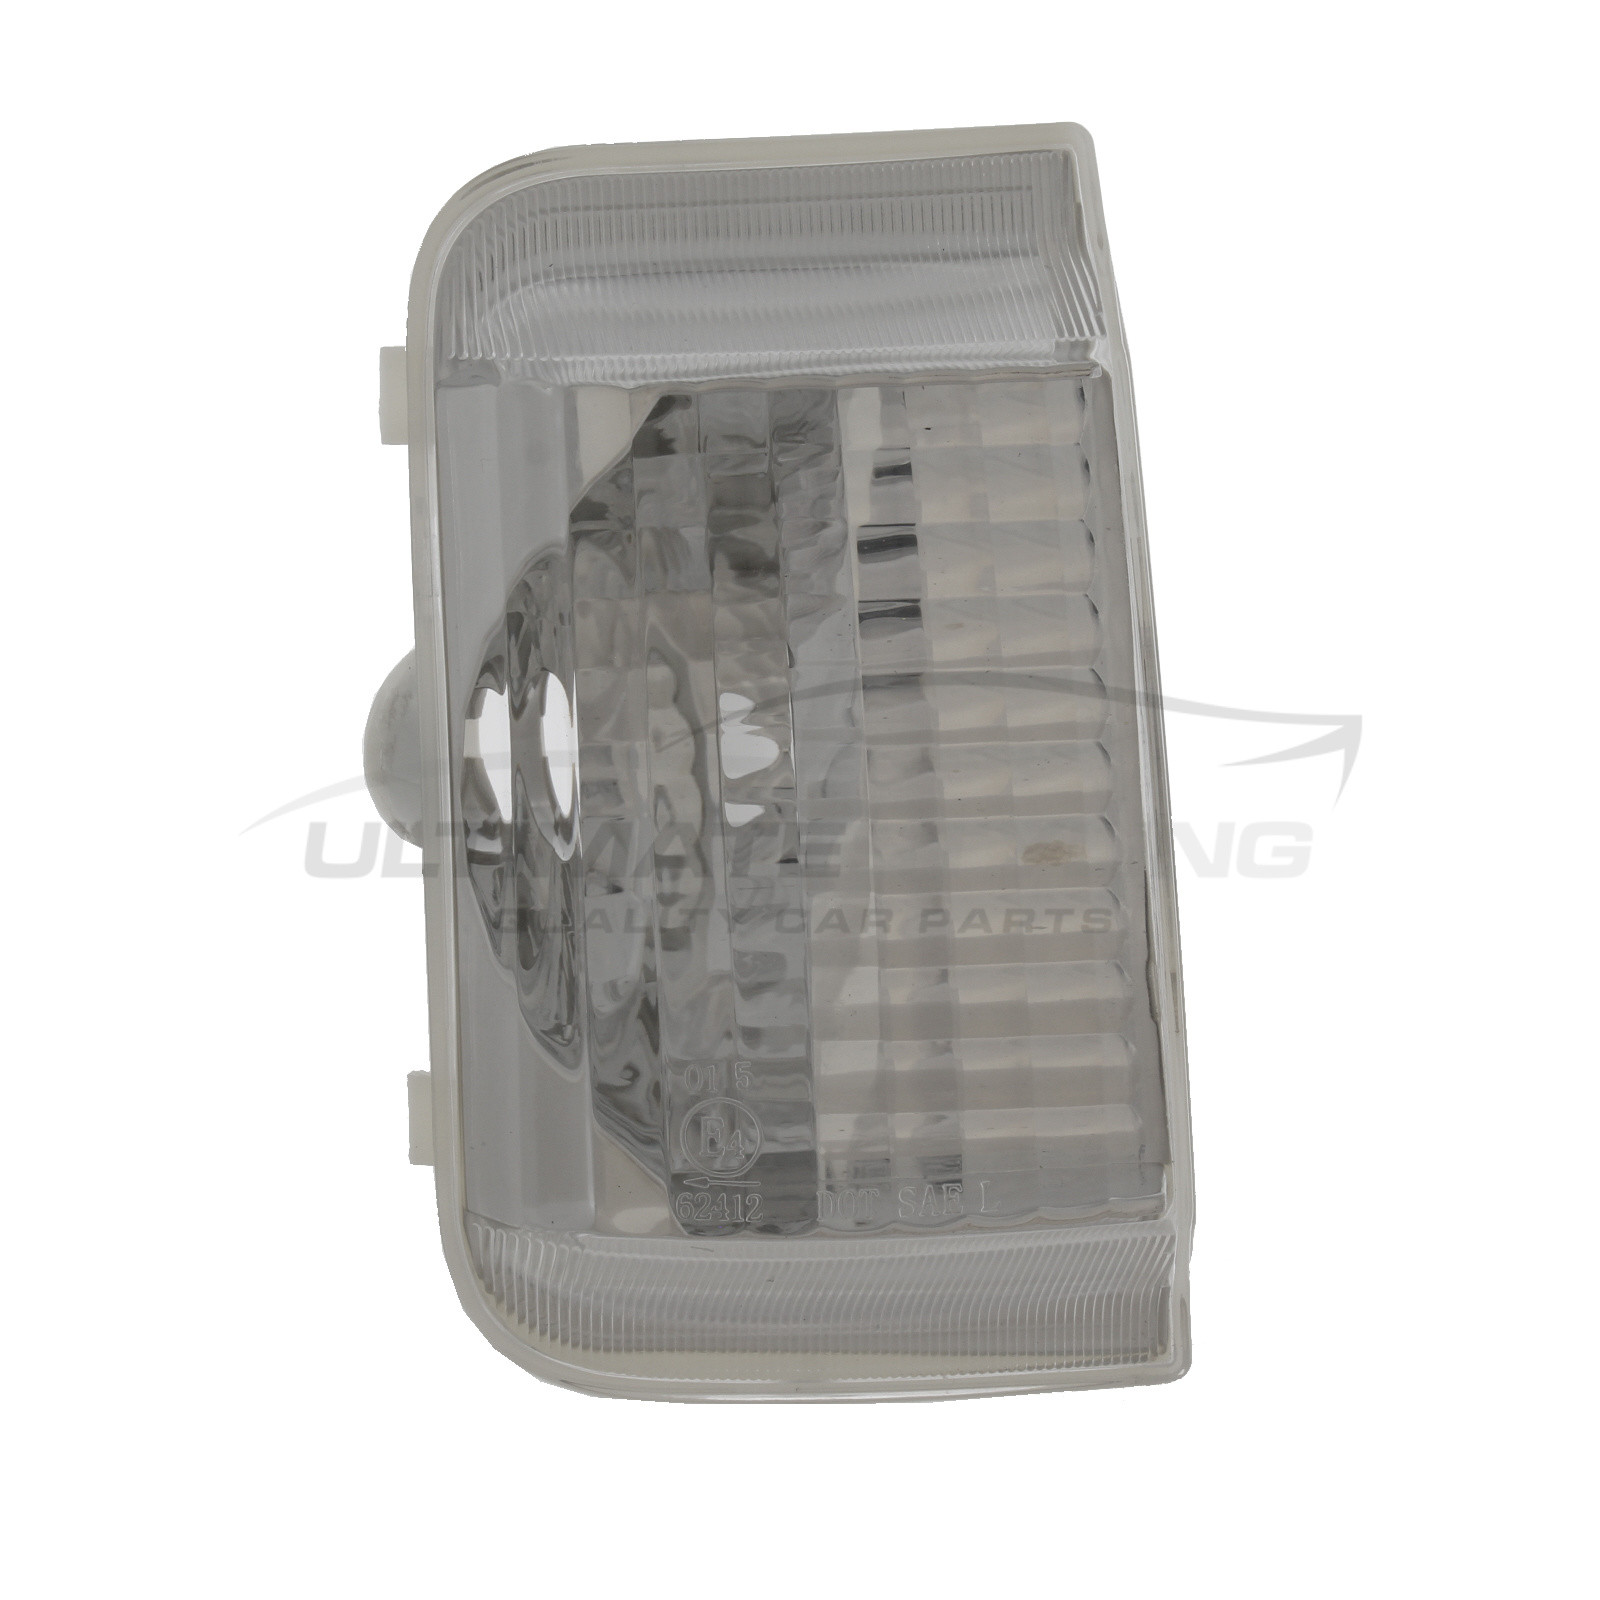 Citroen Relay 2006->, Fiat Ducato 2006->, Peugeot Boxer 2006->, Vauxhall Movano 2021-> Clear Non-LED To Suit Amber Bulb (Not Included) Mirror Indicator Excludes Amber Reflector Passenger Side (LH)